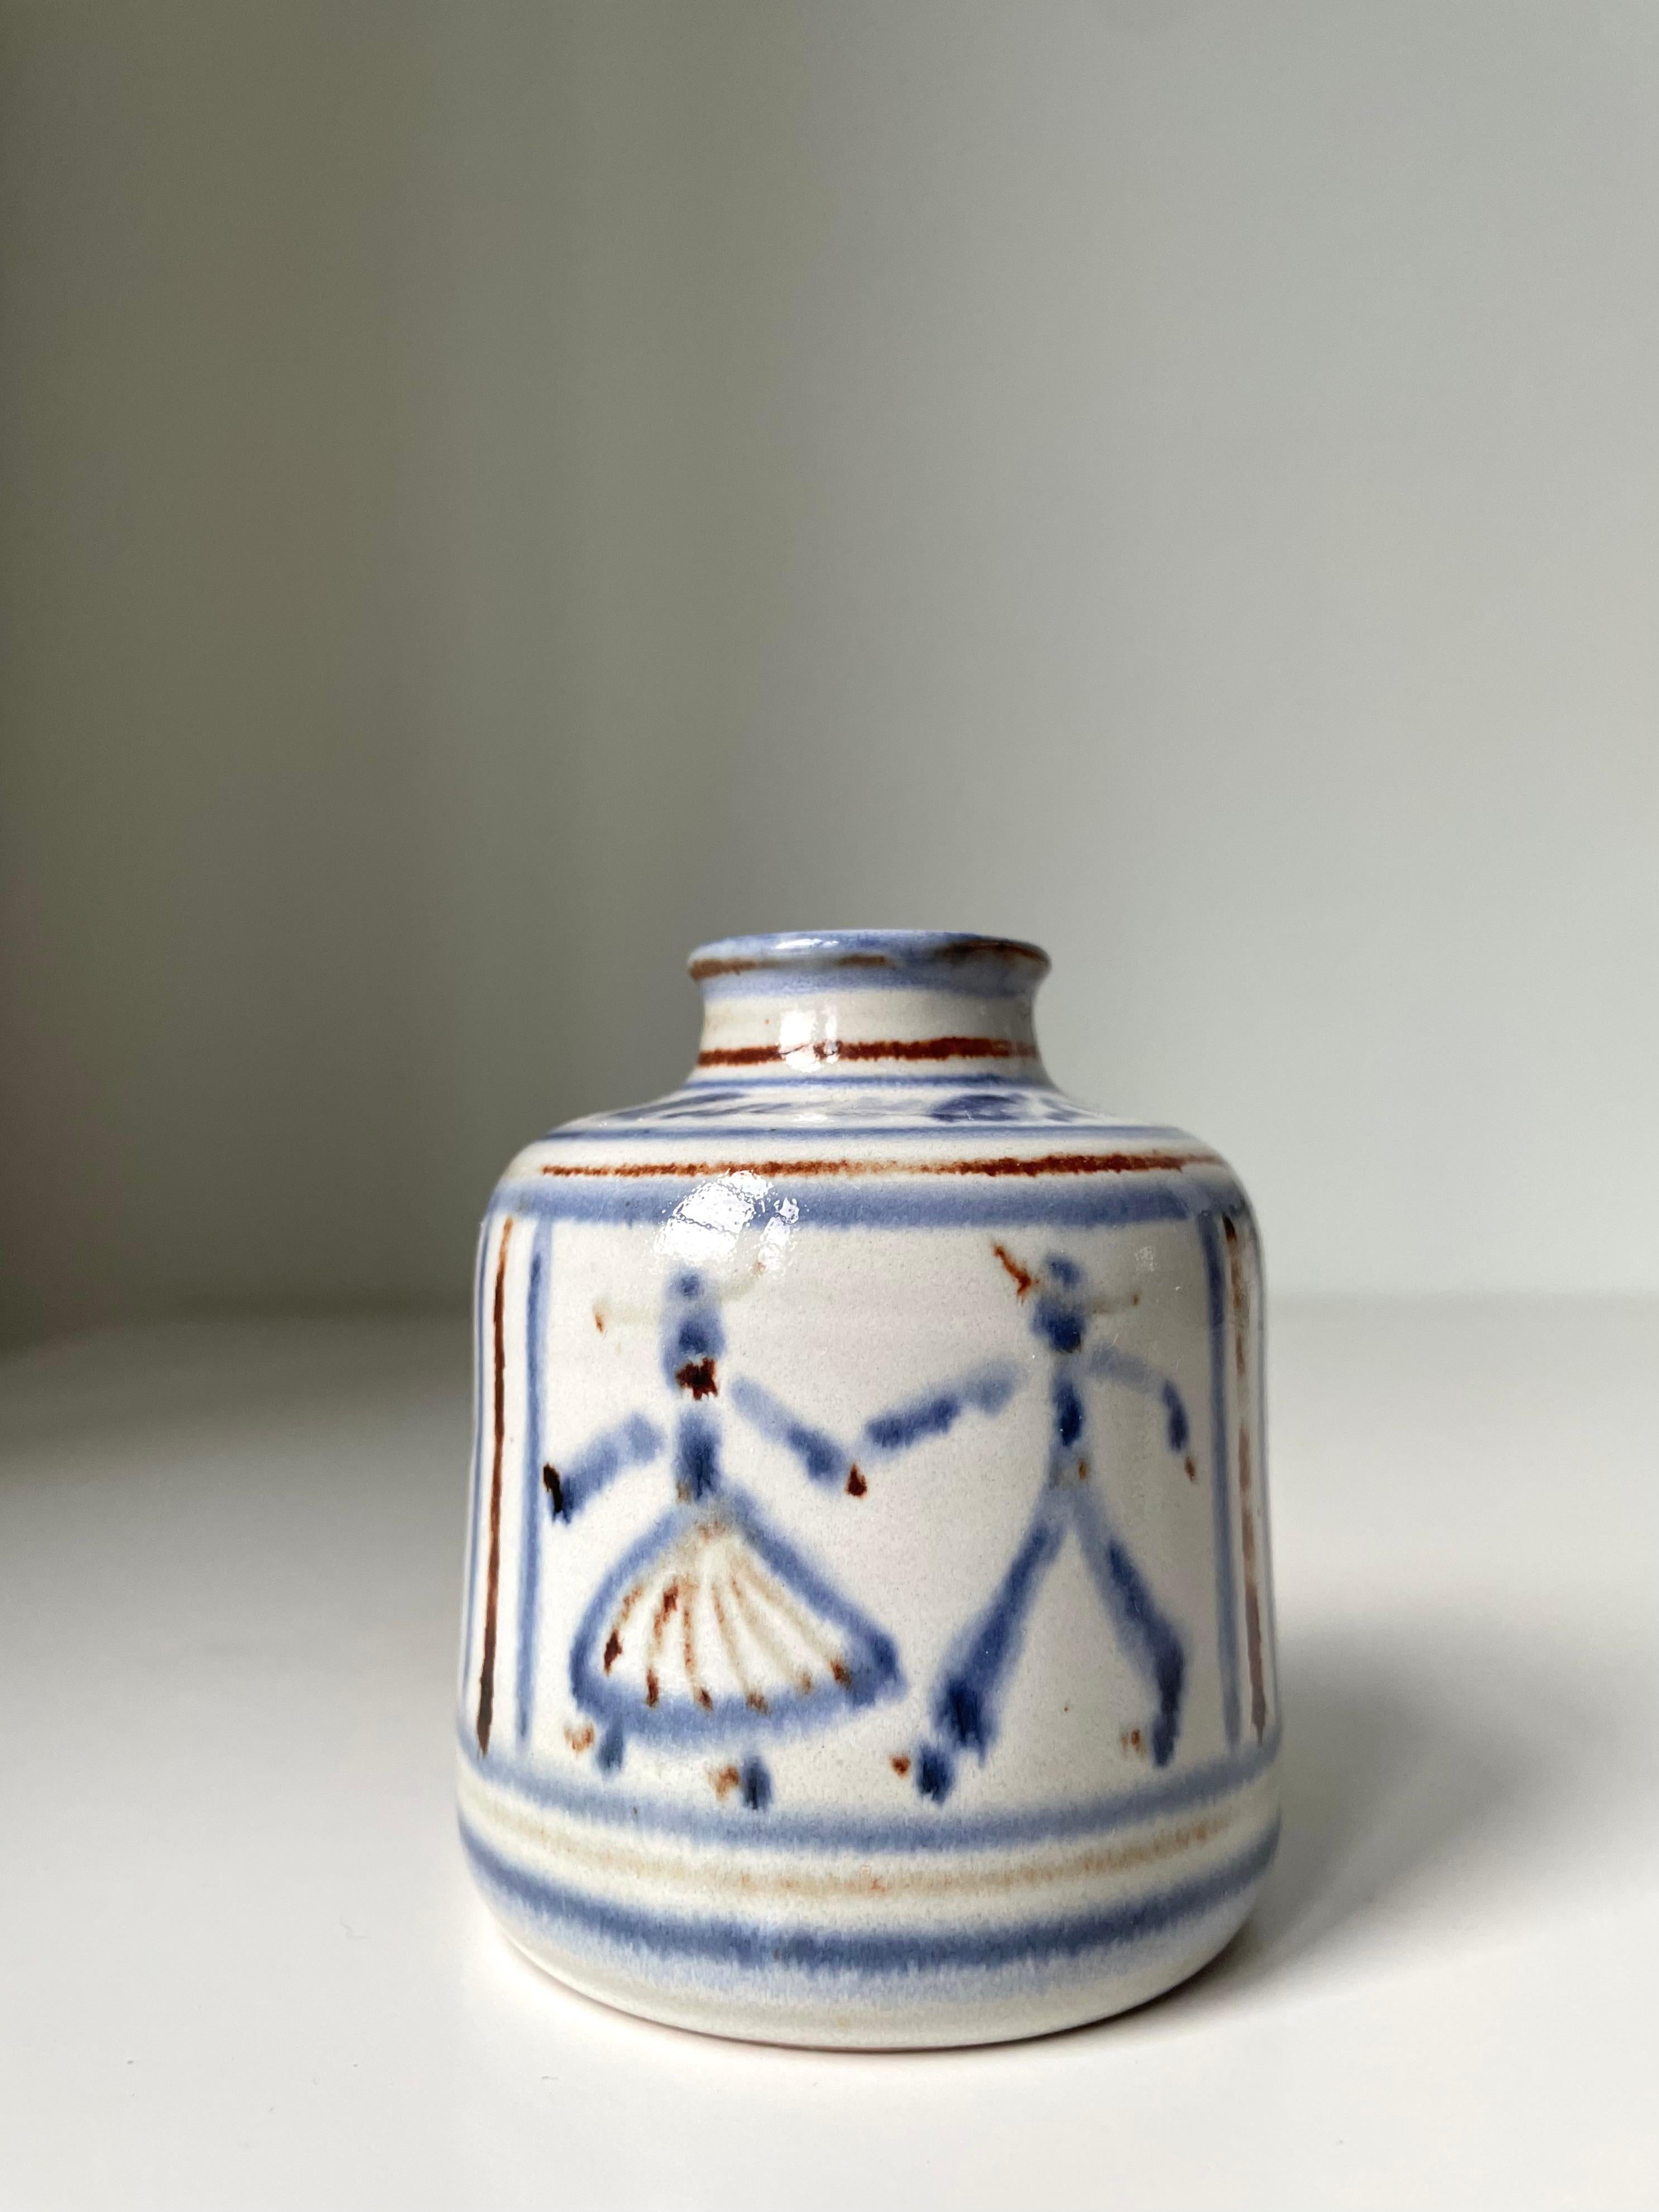 Ceramic L. Hjorth Hand-Decorated Blue White Vase, 1950s For Sale